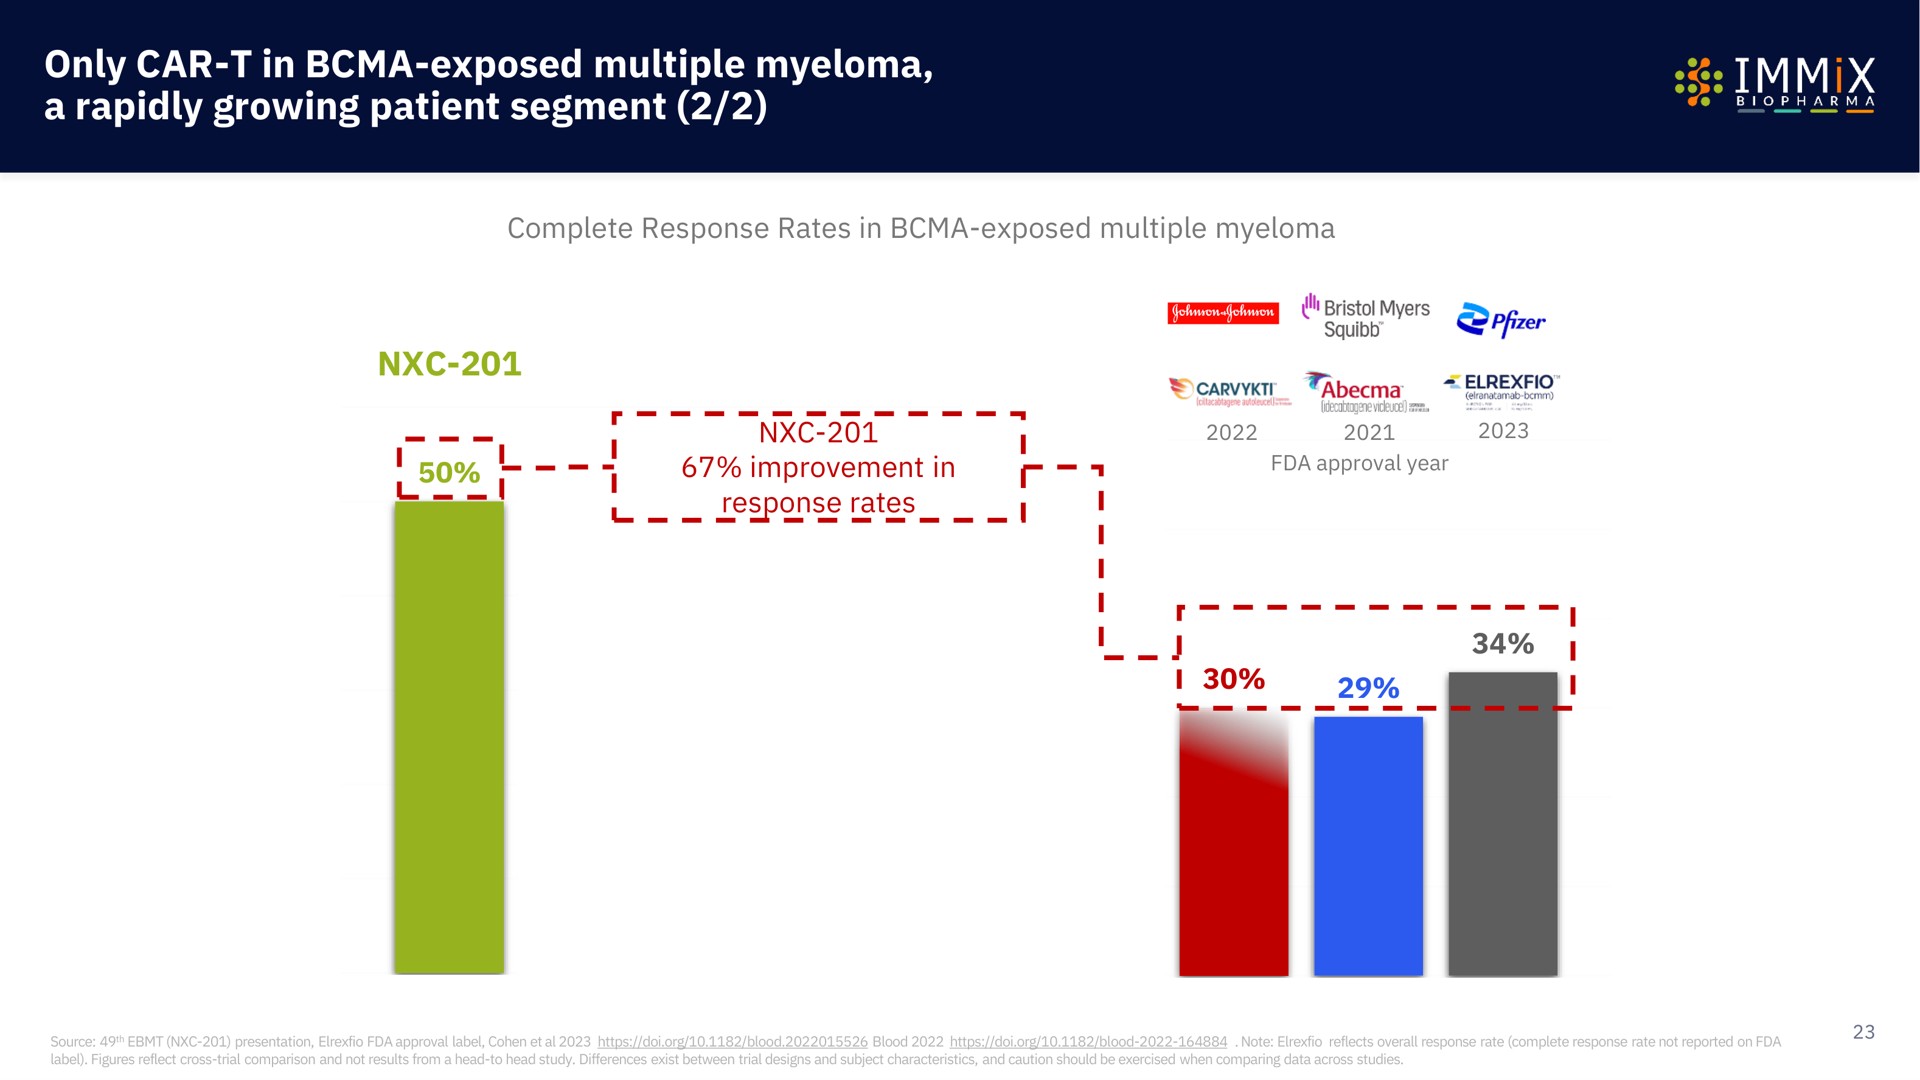 only car in exposed multiple myeloma a rapidly growing patient segment | Immix Biopharma